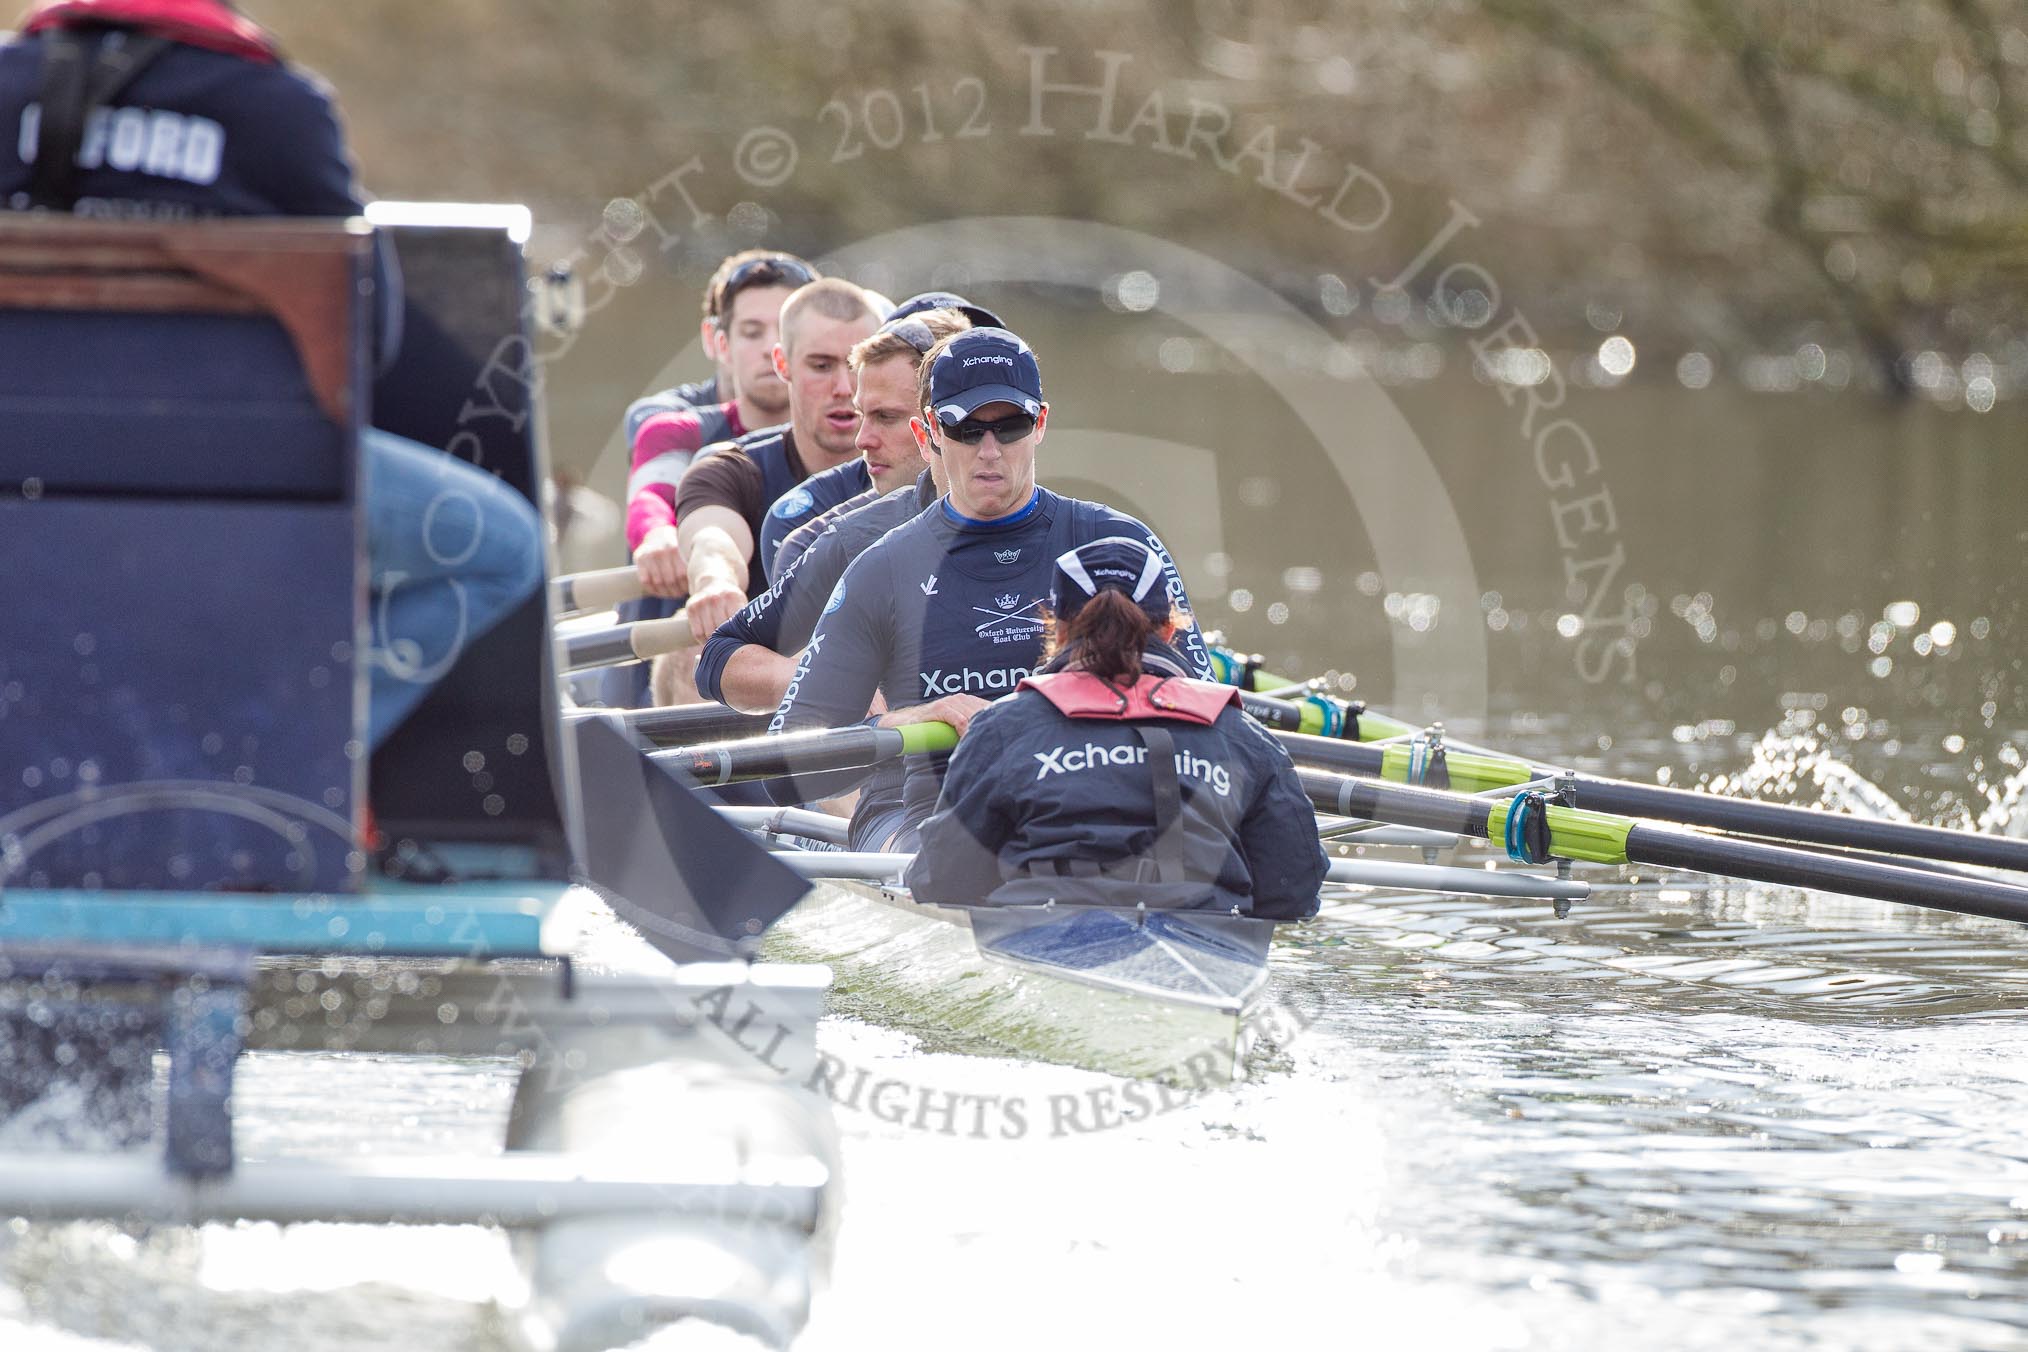 The Boat Race season 2012 - OUBC training: Cox Zoe de Toledo, stroke Roel Haen, 7 Dan Harvey, 6 Dr. Hanno Wienhausen, 5 Karl Hudspith, 4 Alexander Davidson, 3 Kevin Baum, 2 William Zeng, and bow Dr. Alexander Woods, on the left the Oxford coach..


Oxfordshire,
United Kingdom,
on 20 March 2012 at 15:29, image #44